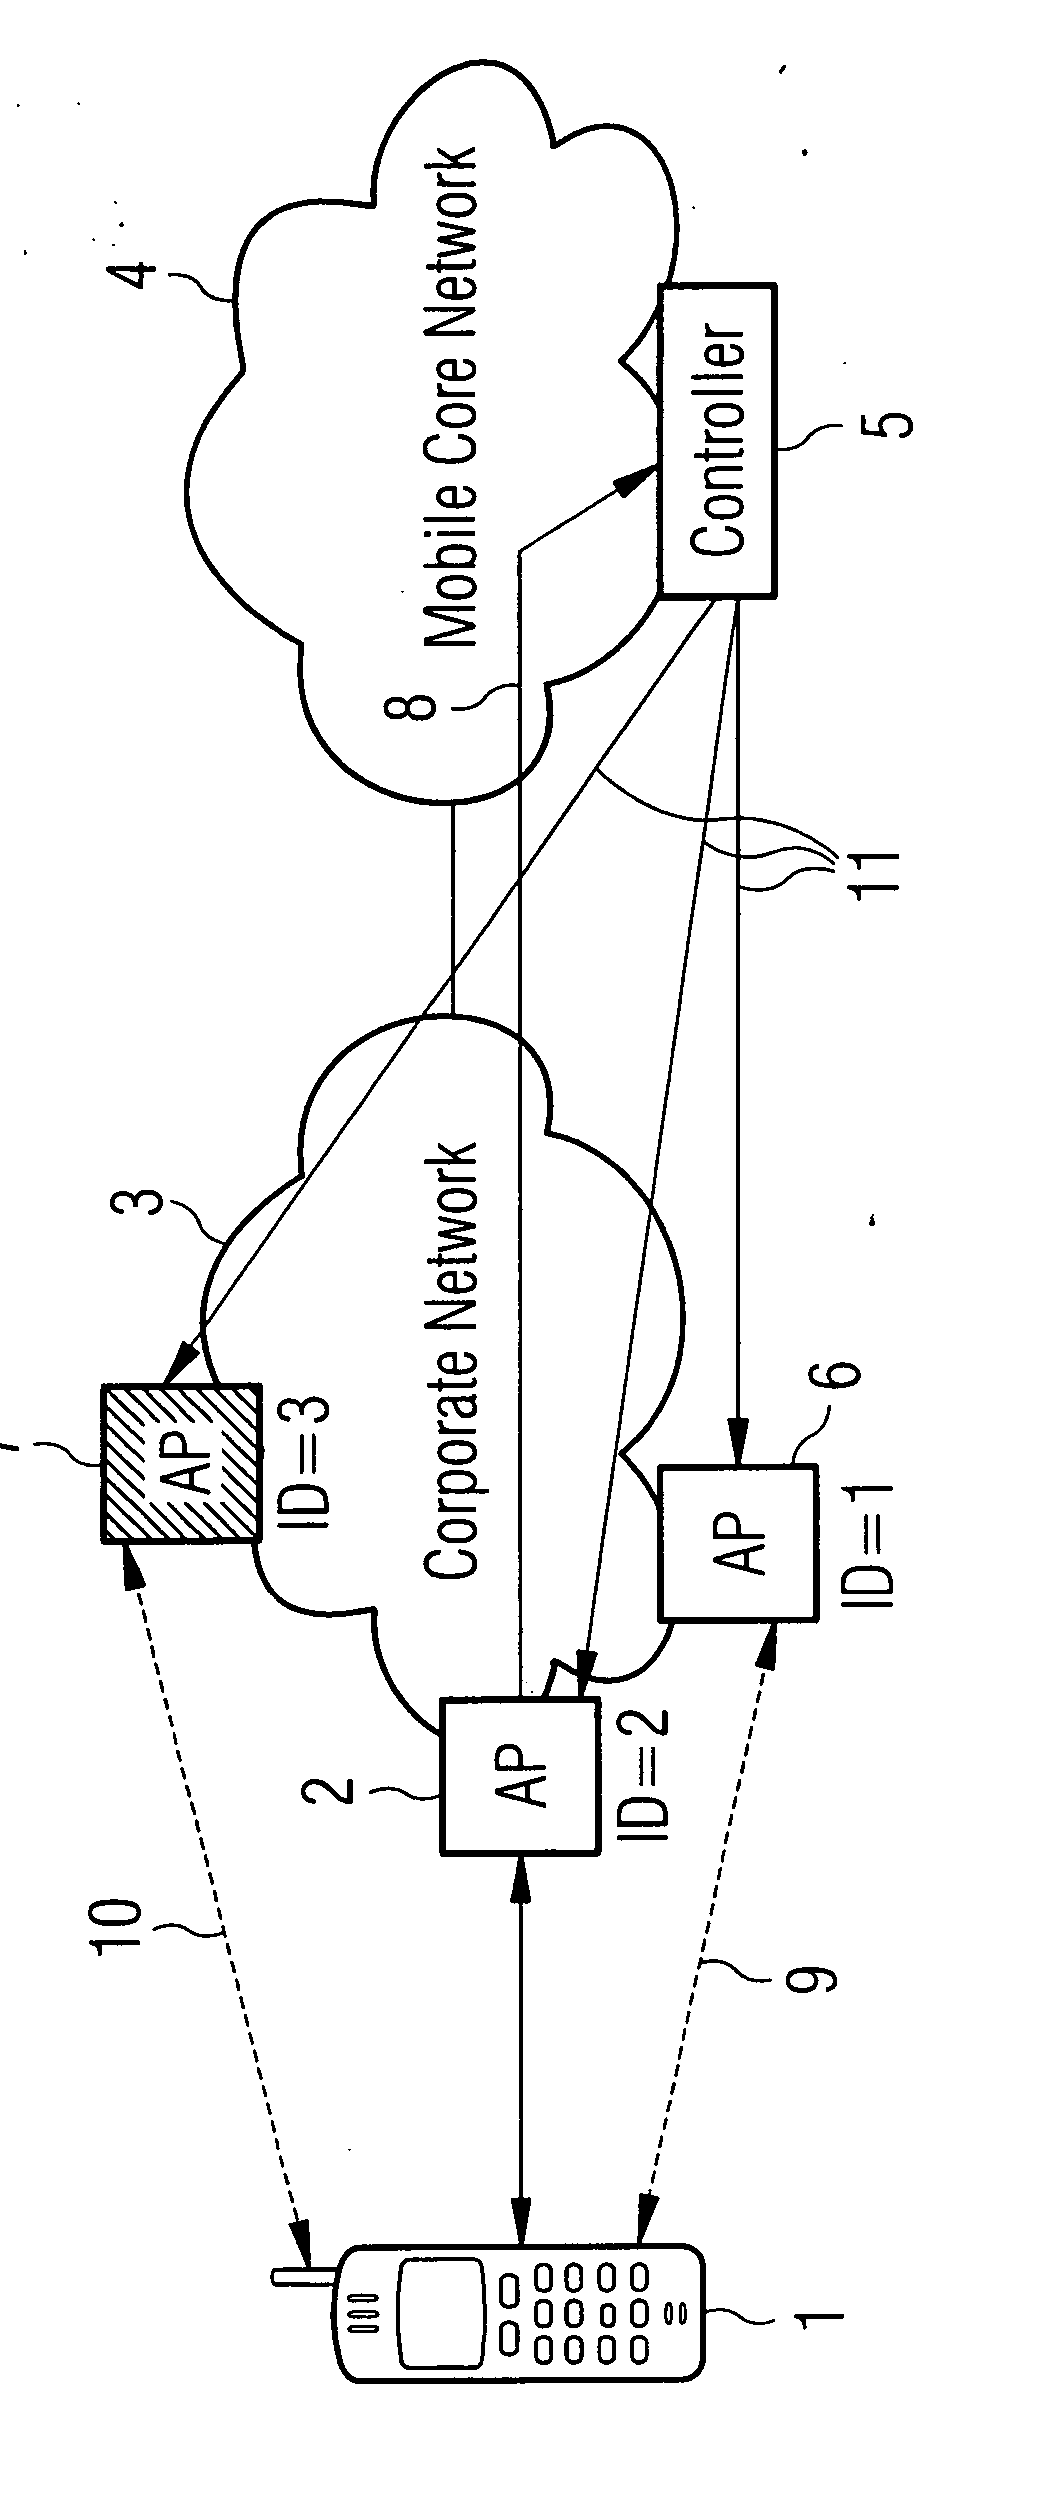 Method of verifying integrity of an access point on a wireless network